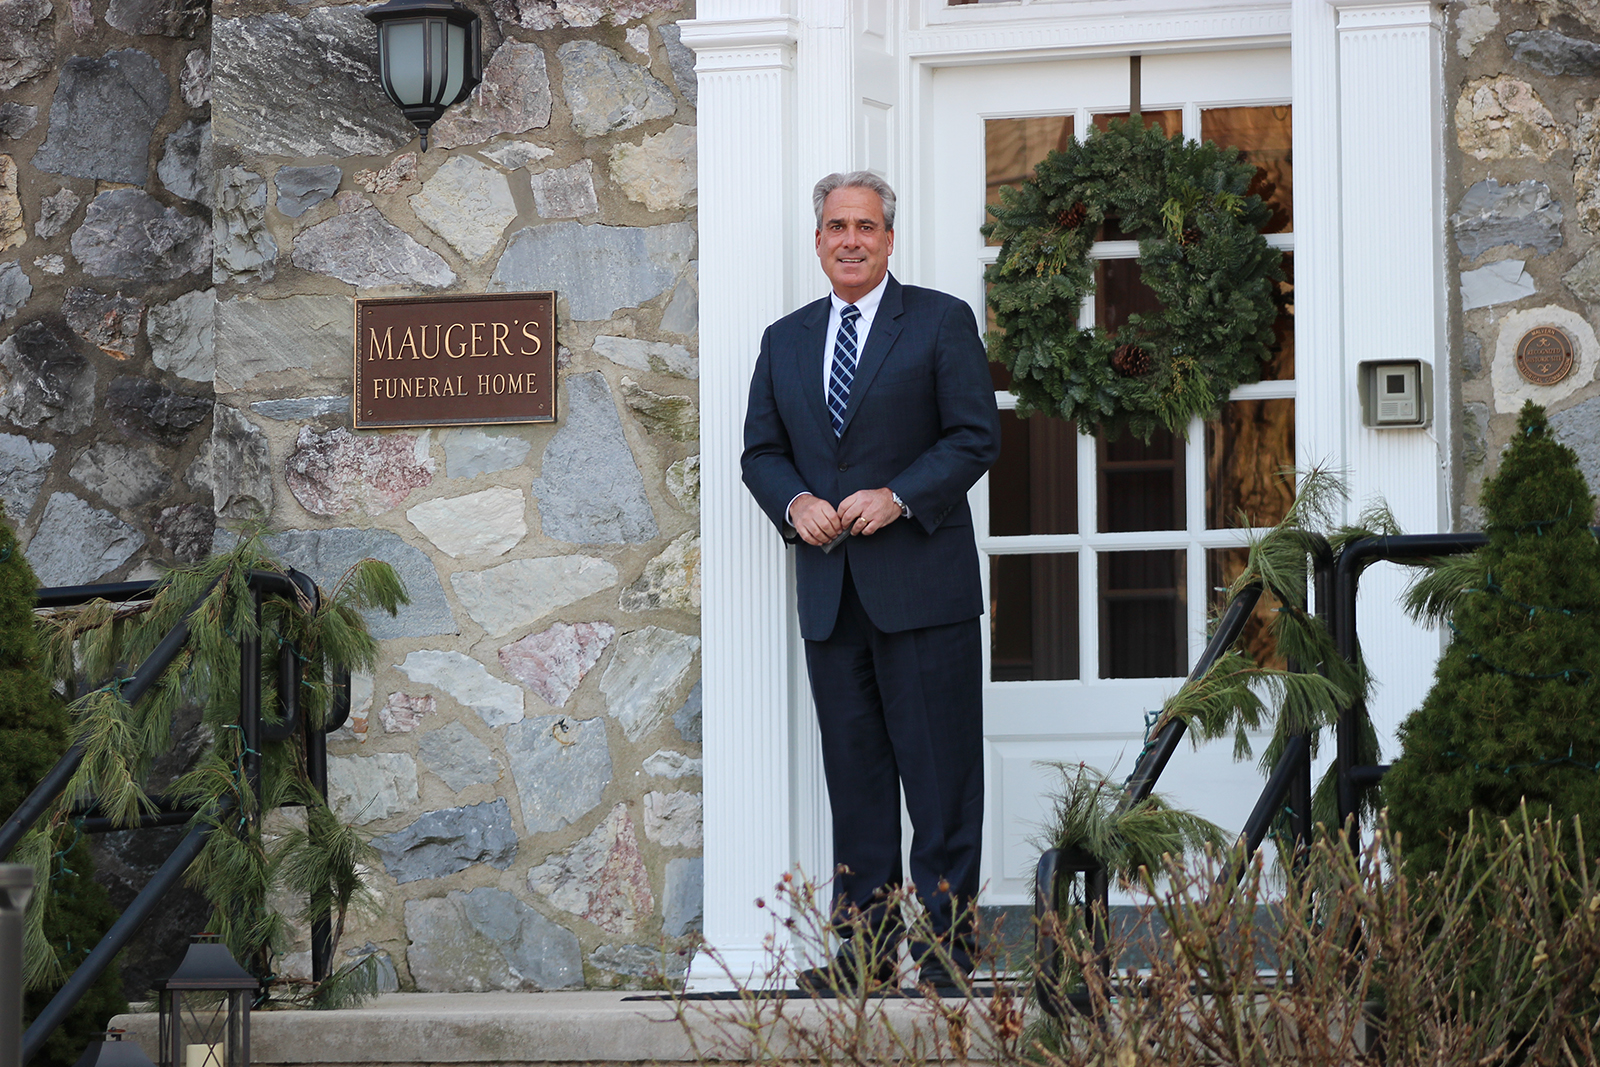 Francis X. Givnish at Mauger-Givnish Funeral Home in Malvern, Pennsylvania. RNS photo by Elizabeth Evans